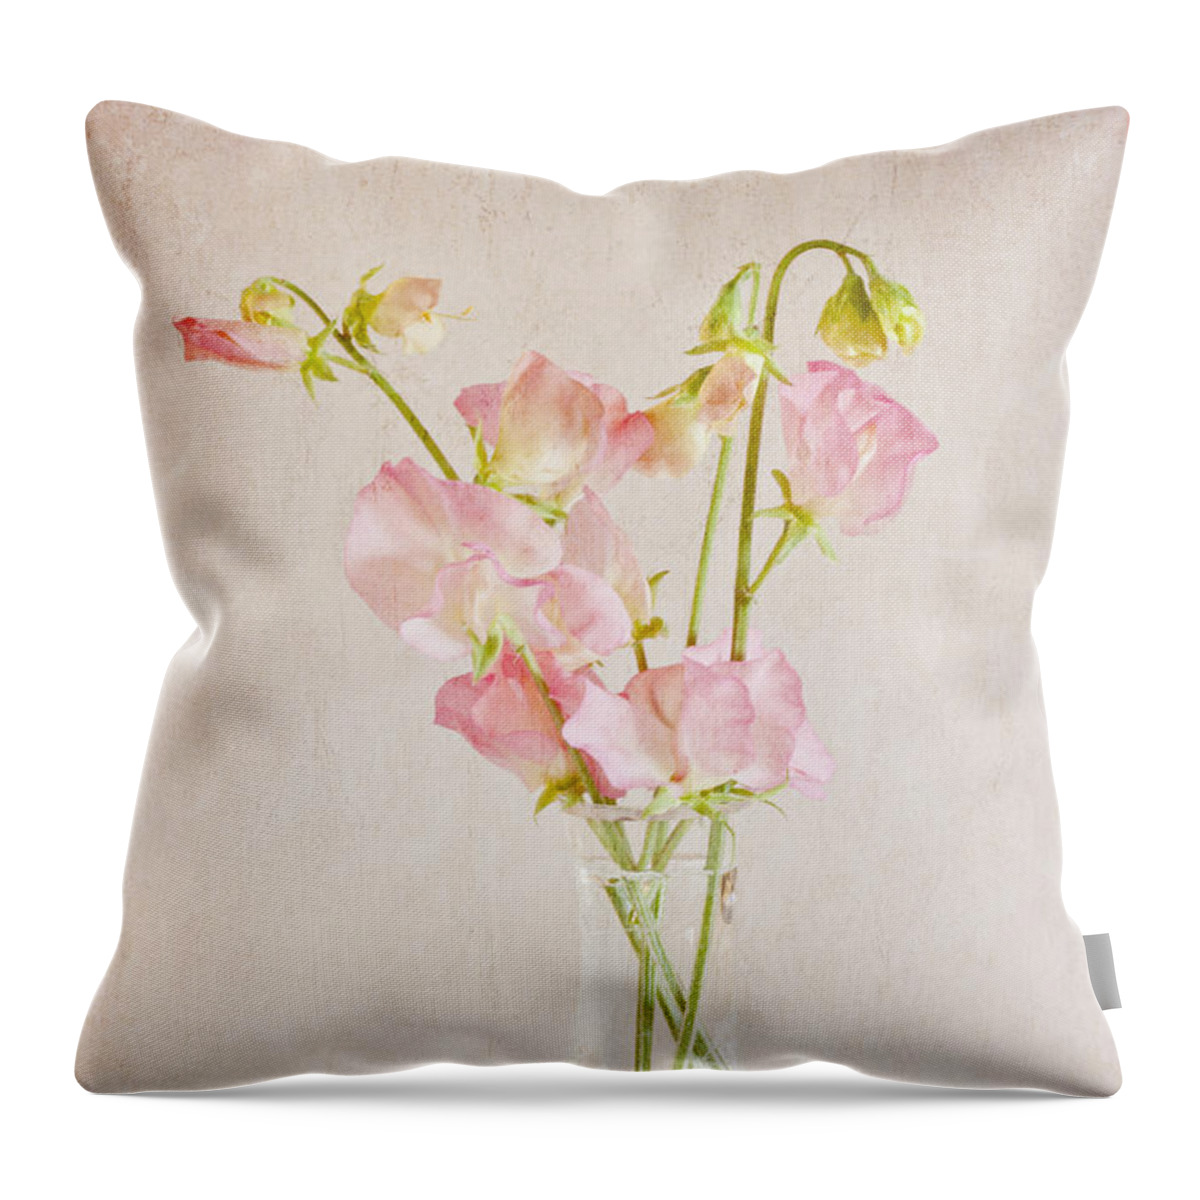 Sweet Peas Throw Pillow featuring the photograph Old Fashioned Sweet Peas by Sandra Foster